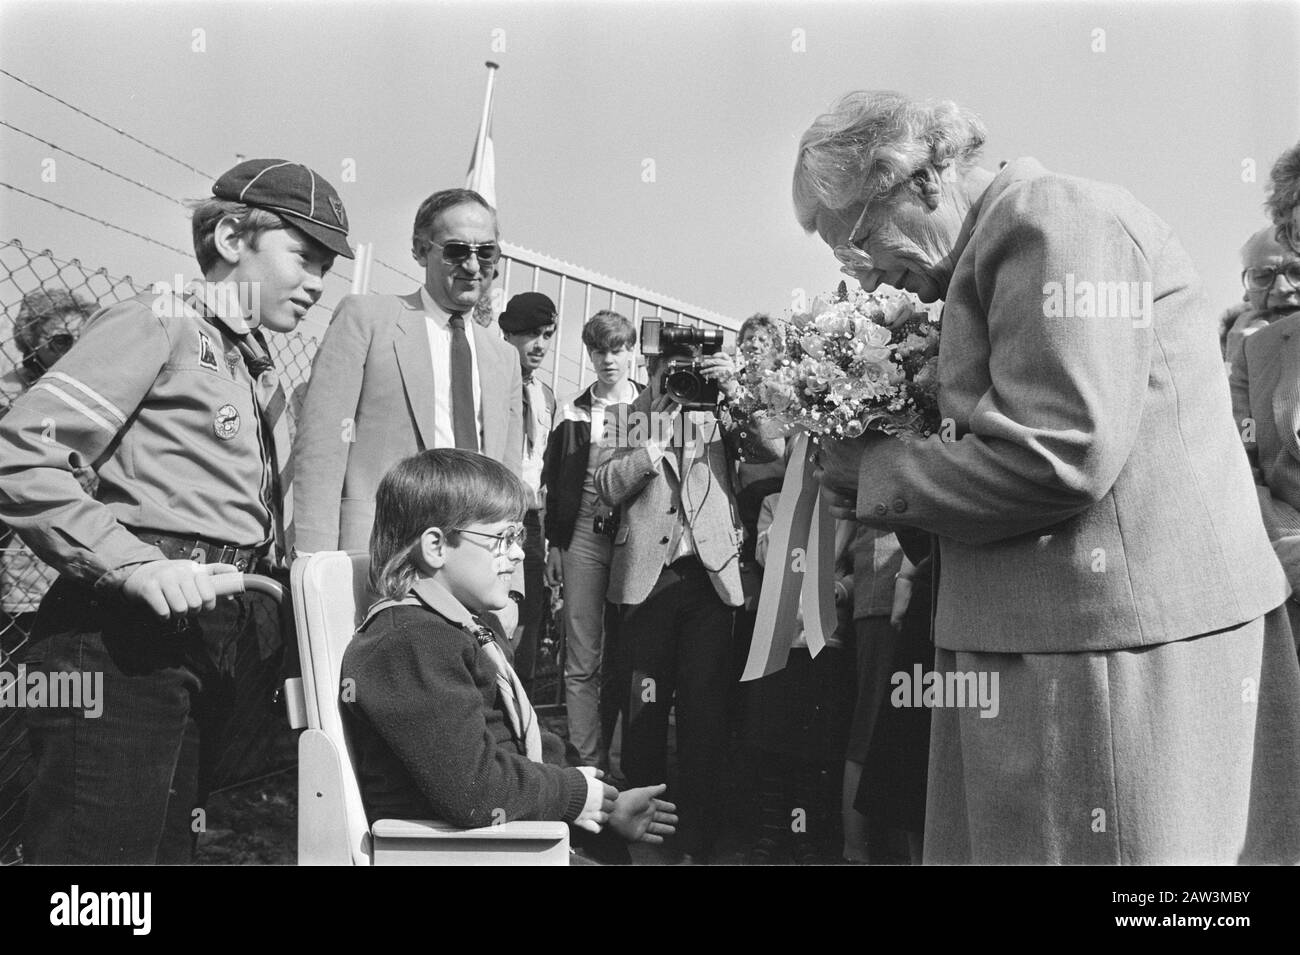 Princess Juliana opens clubhouse scouting group Taciturne in Rotterdam; Princess Juliana gets flowers Diane Far Date: April 14, 1984 Location: Rotterdam, South Holland Keywords: FLOWERS, vents, scouting, princesses, scouting Person Name: Diane Far, Juliana, princess, Orange, Willem van Stock Photo